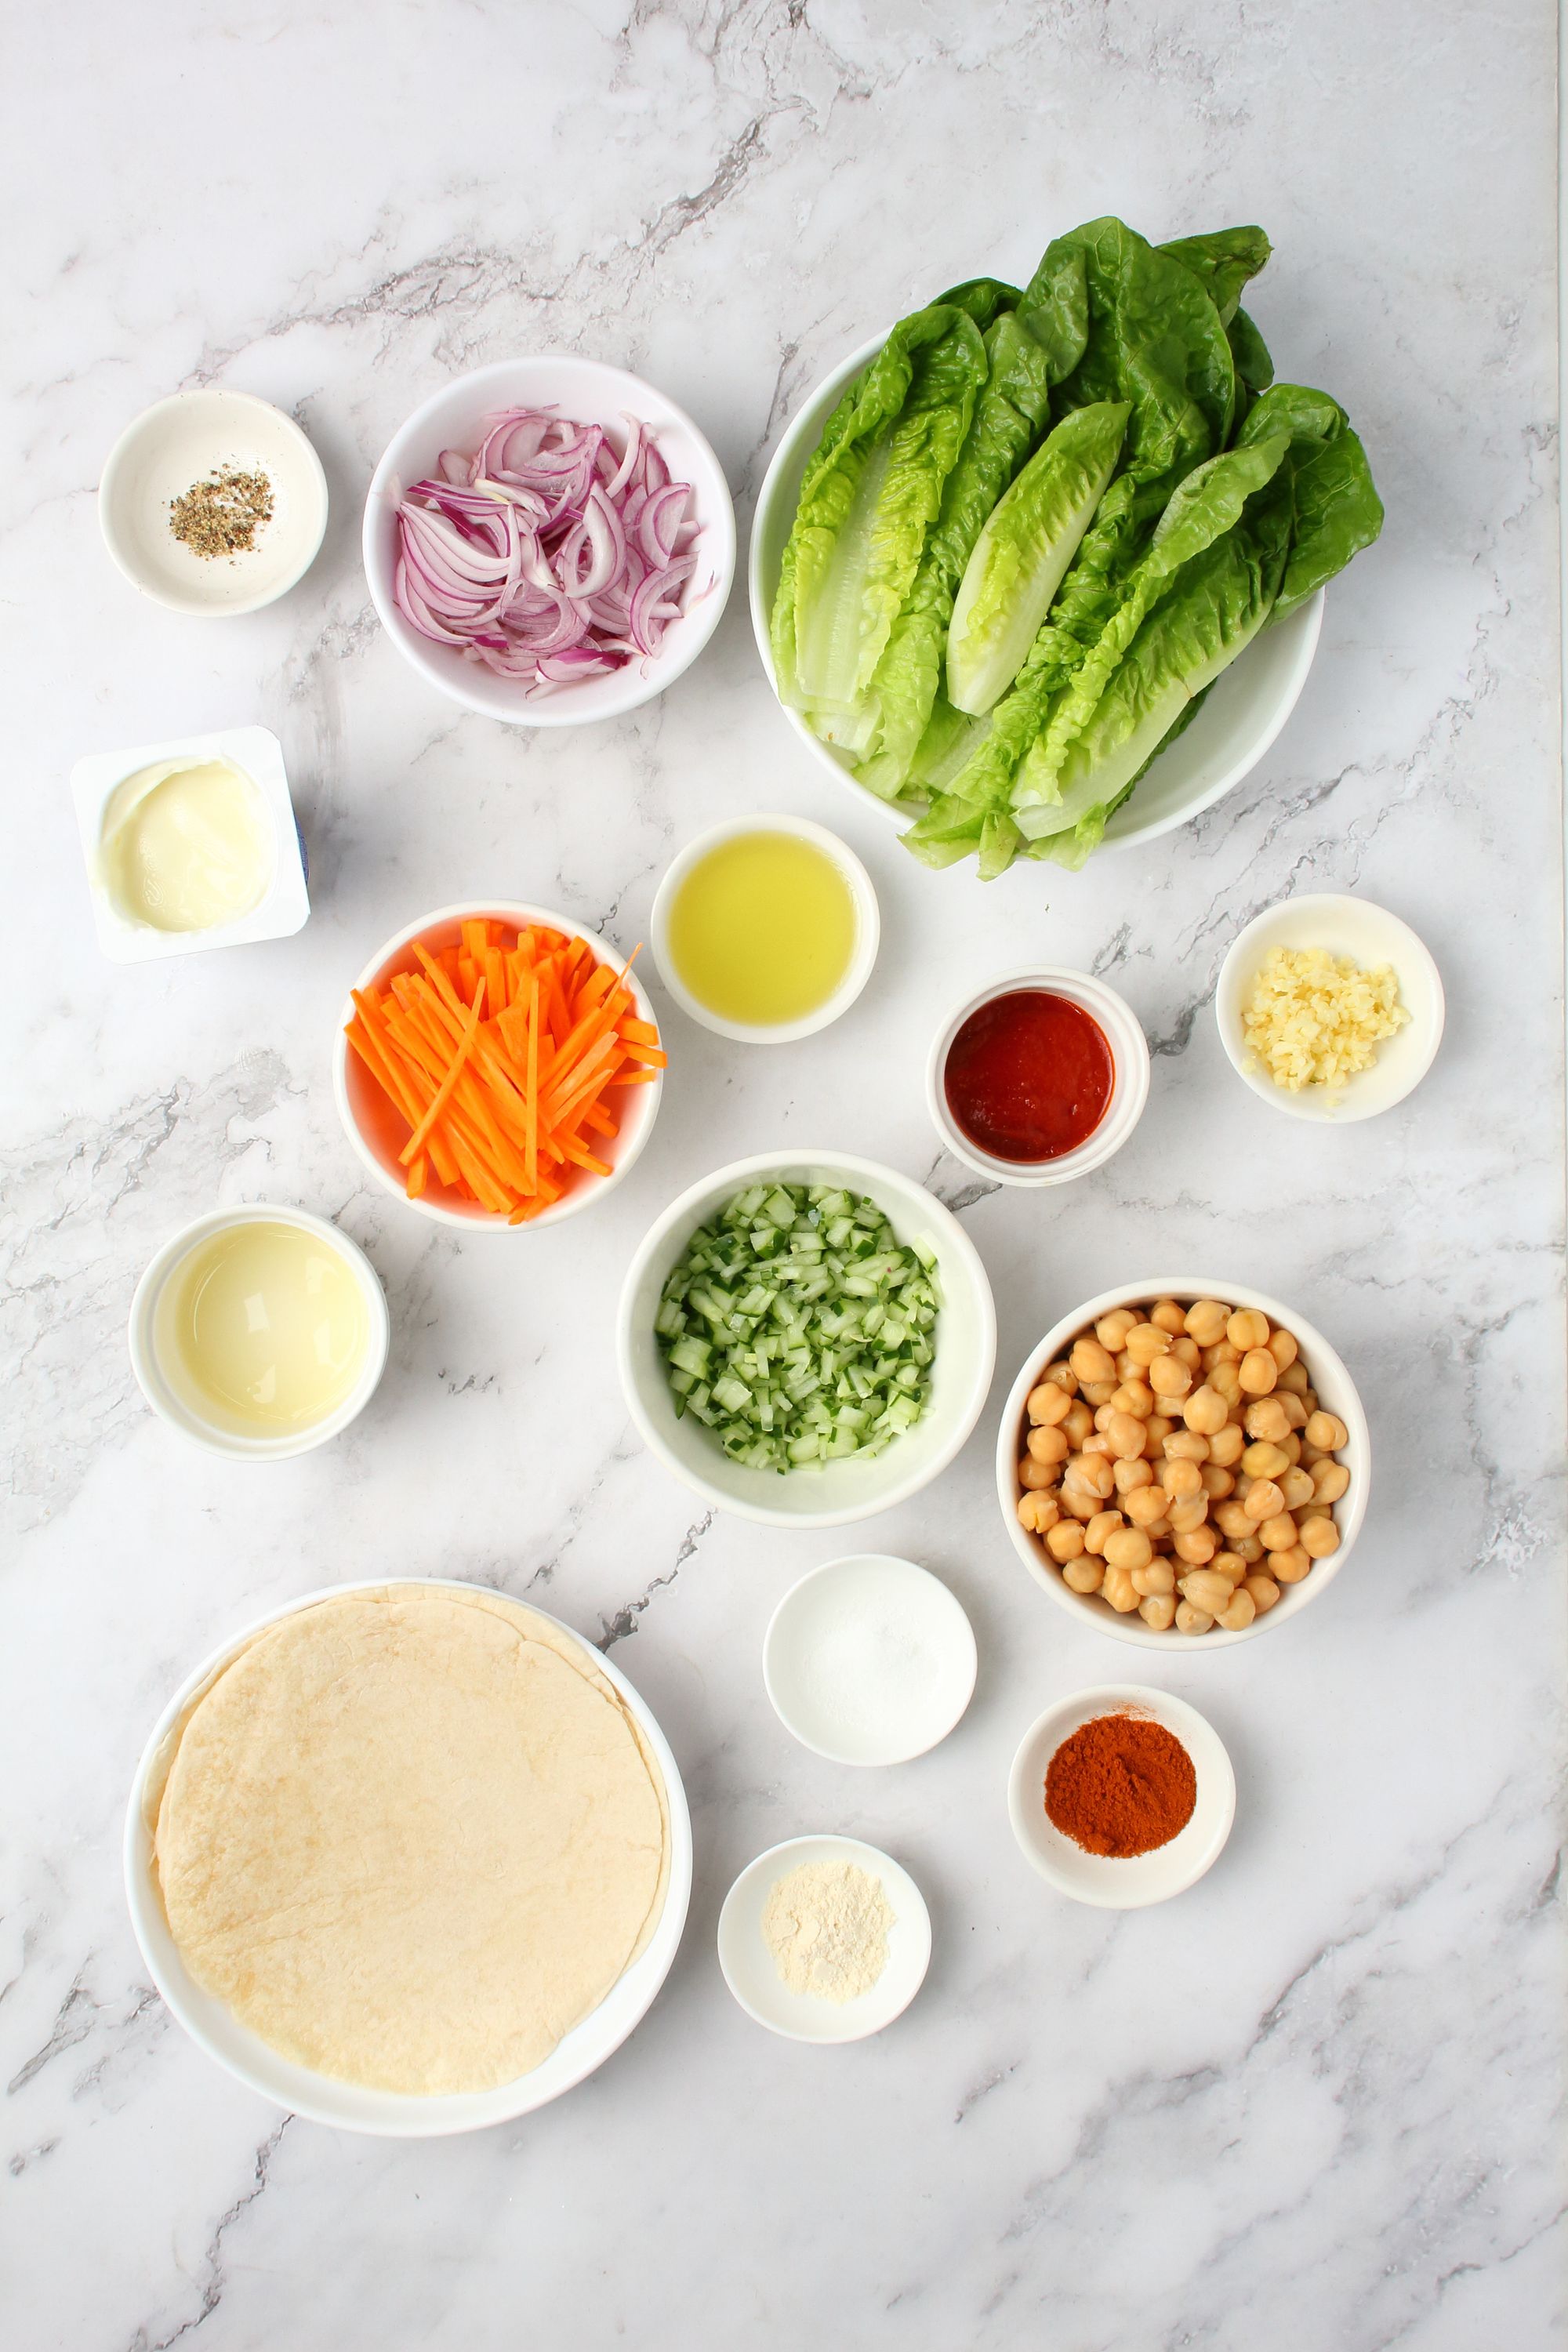 Ingredients of Buffalo Chickpea Wrap